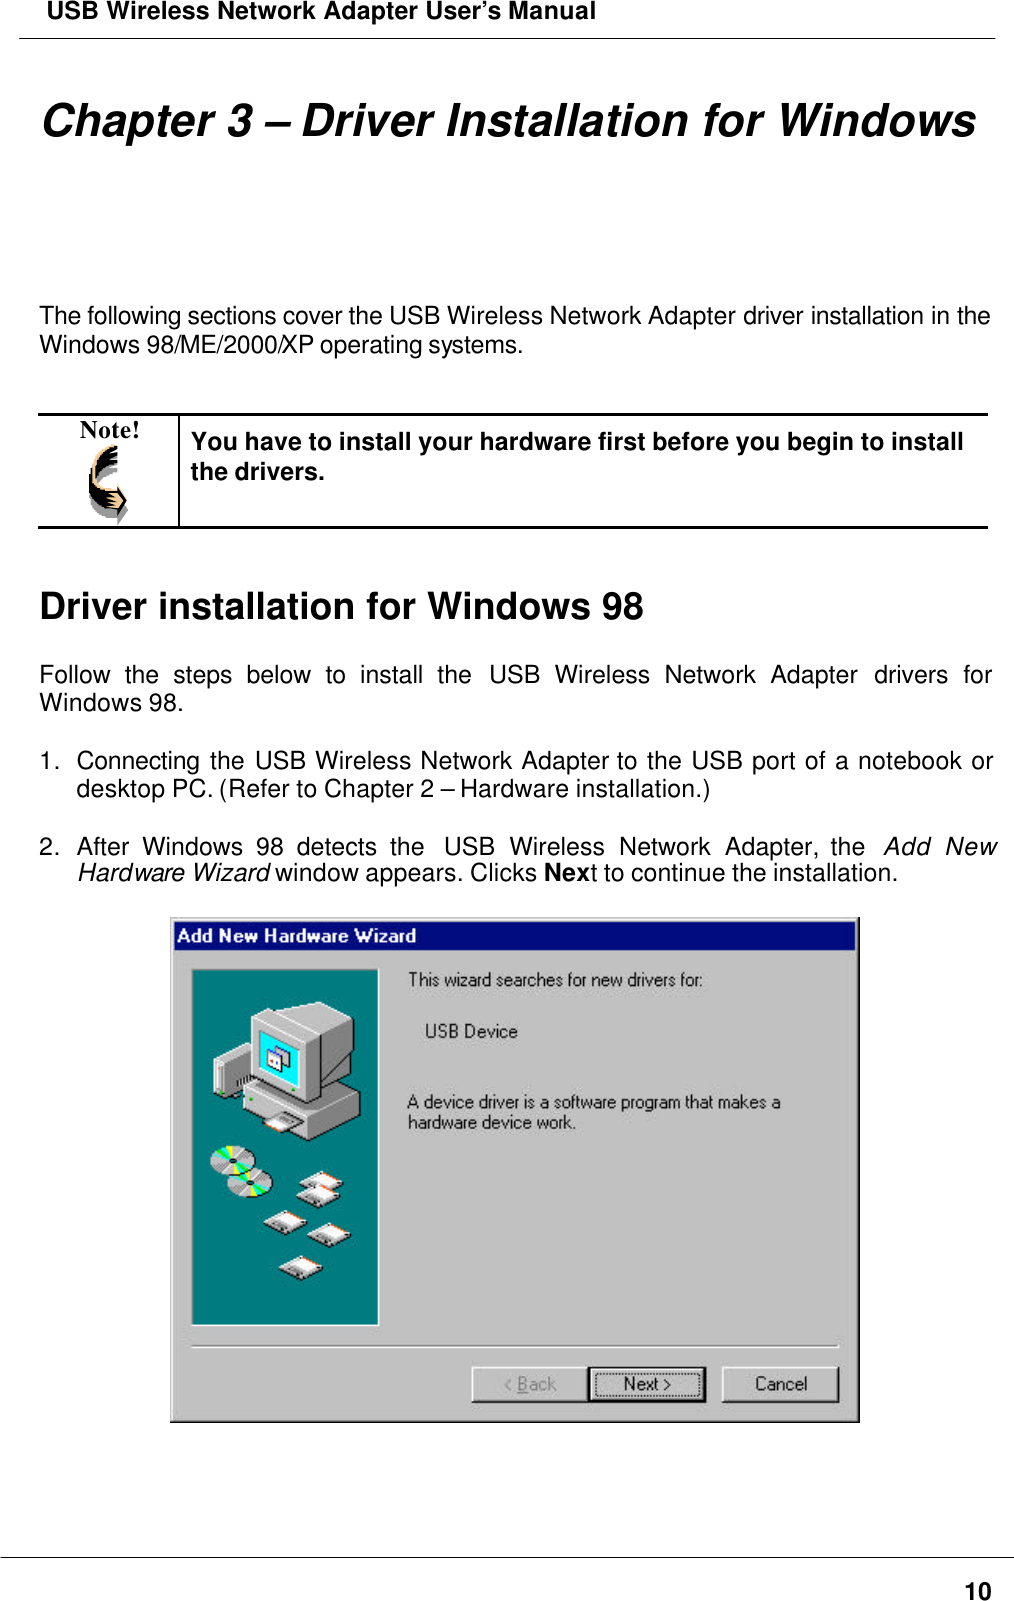  USB Wireless Network Adapter User’s Manual10Chapter 3 – Driver Installation for WindowsThe following sections cover the USB Wireless Network Adapter driver installation in theWindows 98/ME/2000/XP operating systems.Note! You have to install your hardware first before you begin to installthe drivers.Driver installation for Windows 98Follow the steps below to install the USB Wireless Network Adapter drivers forWindows 98.1. Connecting the USB Wireless Network Adapter to the USB port of a notebook ordesktop PC. (Refer to Chapter 2 – Hardware installation.)2. After Windows 98 detects the  USB Wireless Network Adapter, the  Add NewHardware Wizard window appears. Clicks Next to continue the installation.